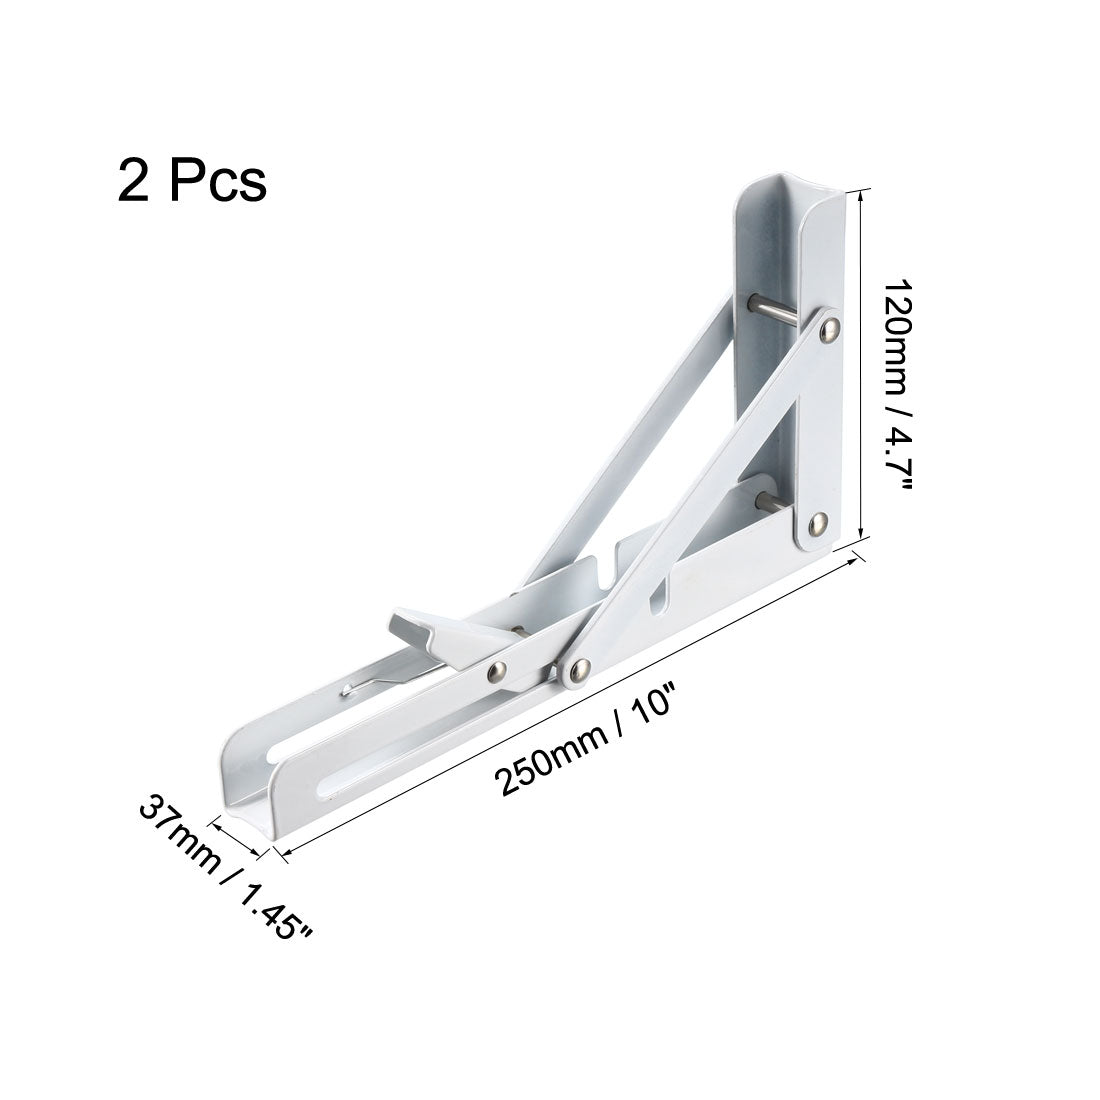 uxcell Uxcell Folding Bracket 10 inch 250mm for Shelf Table Desk Wall Mounted Support Collapsible Long Release Arm Space Saving Carbon Steel 2pcs